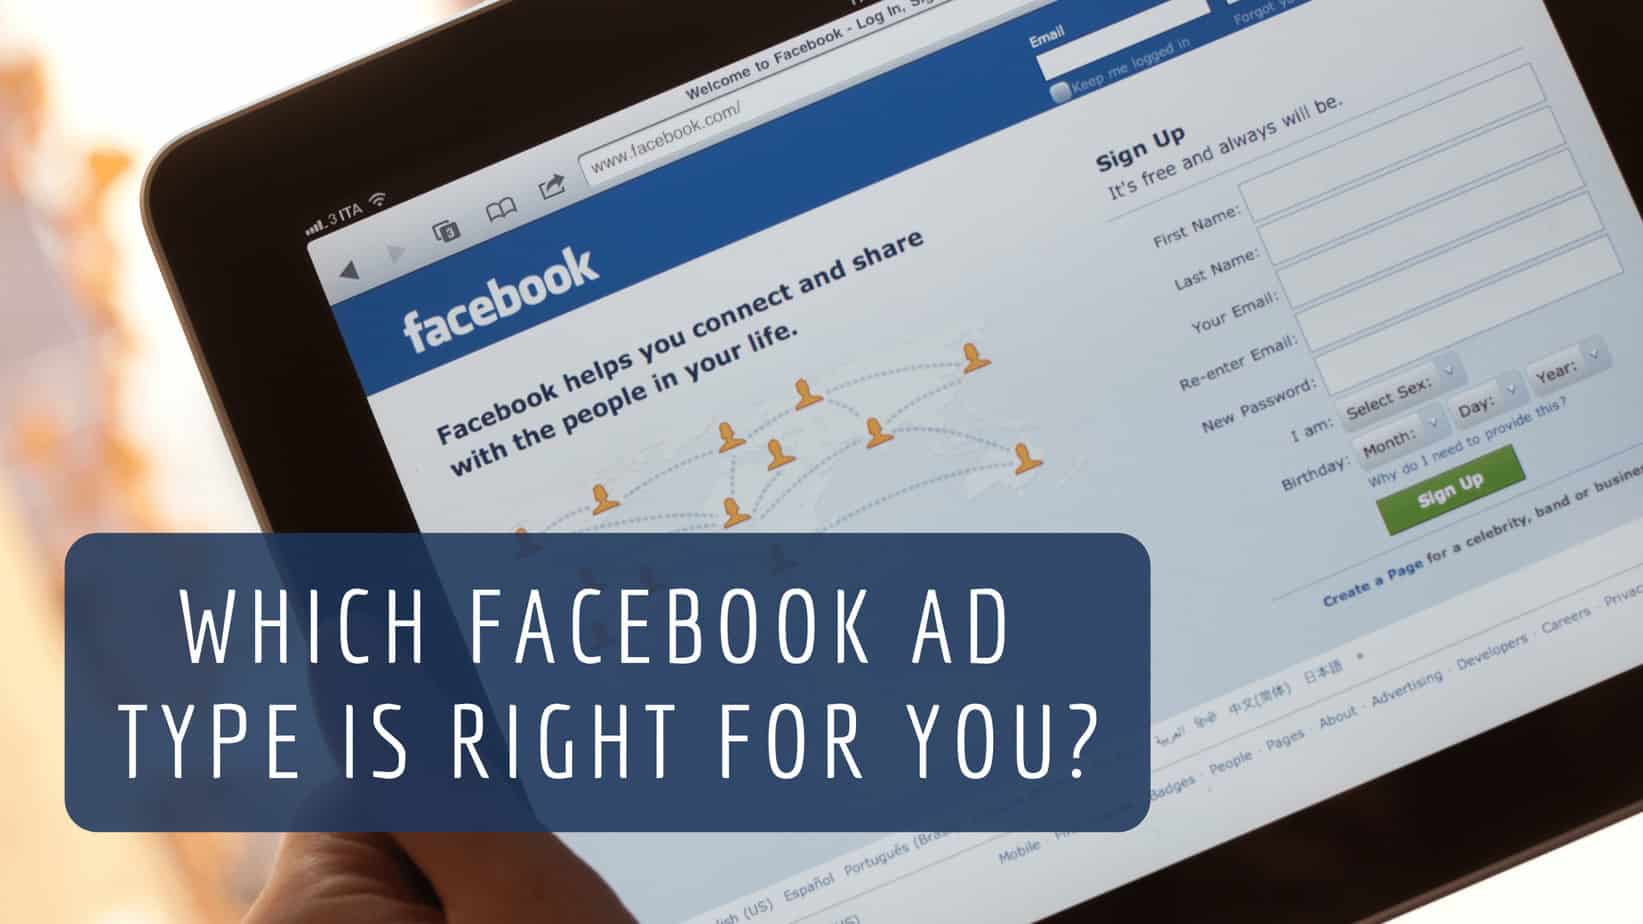 Featured image for “Which Facebook Ad Type is Right for You”